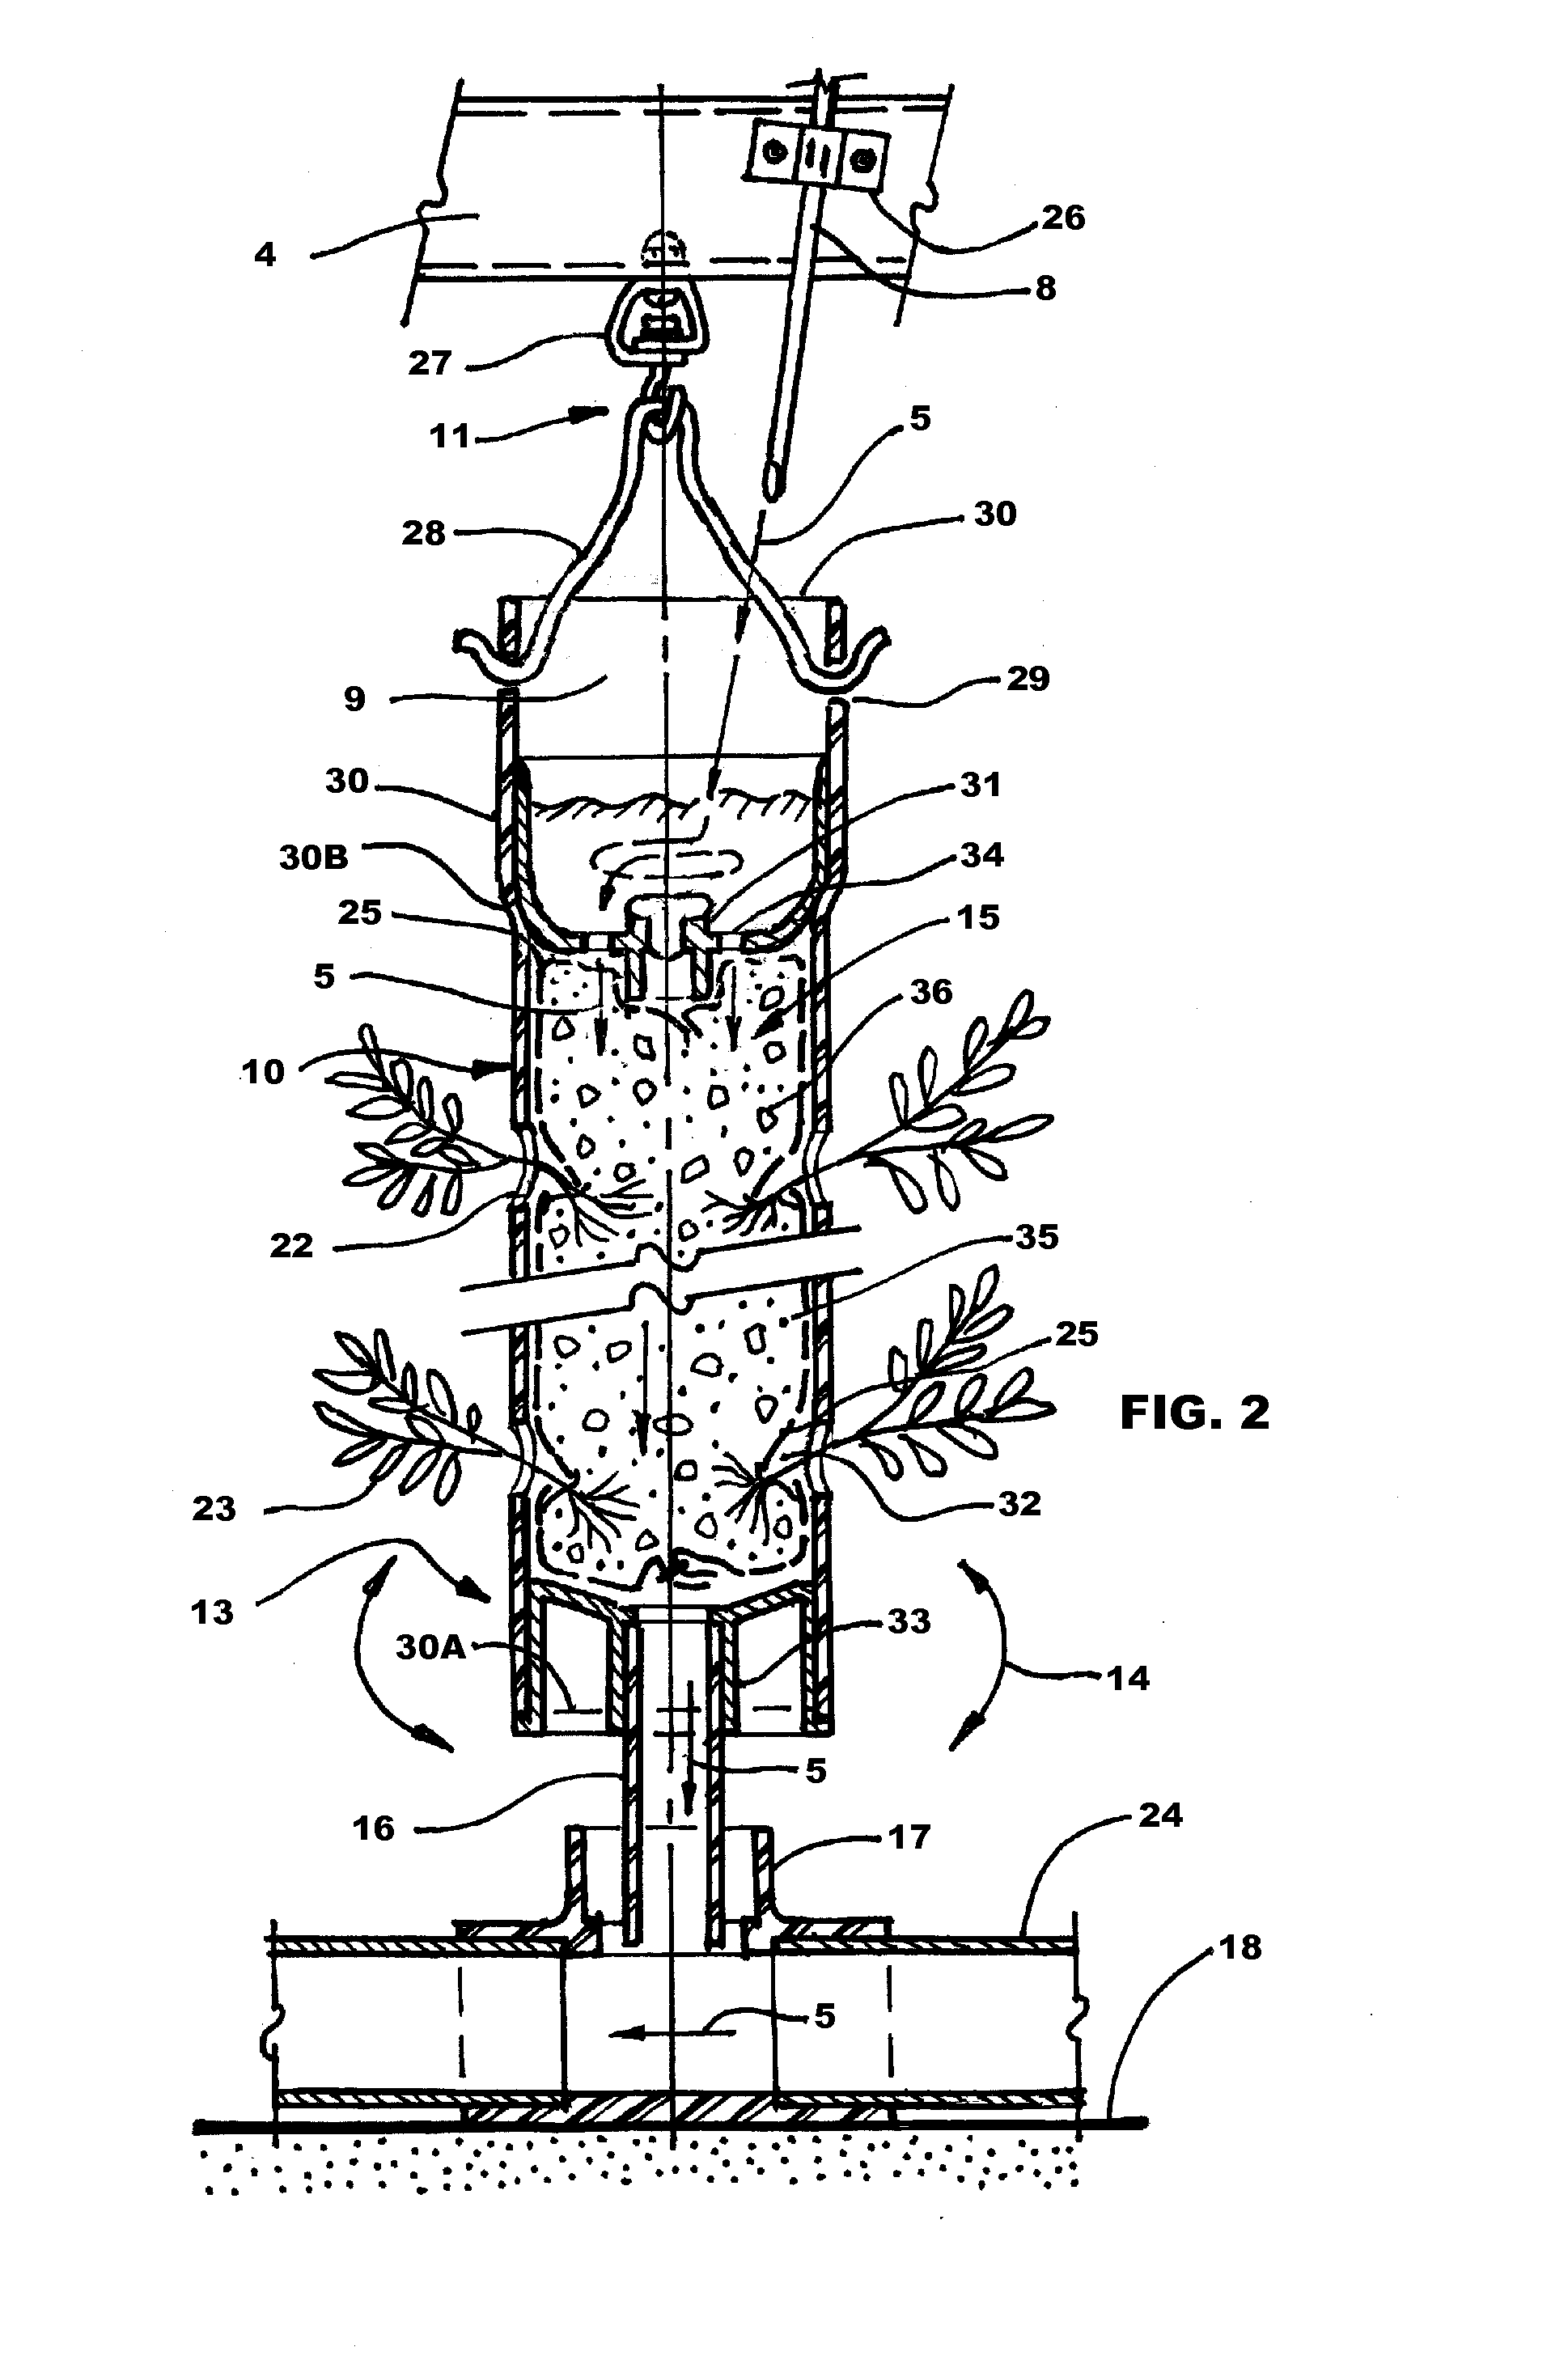 Light-weight modular adjustable vertical hydroponic growing system and method